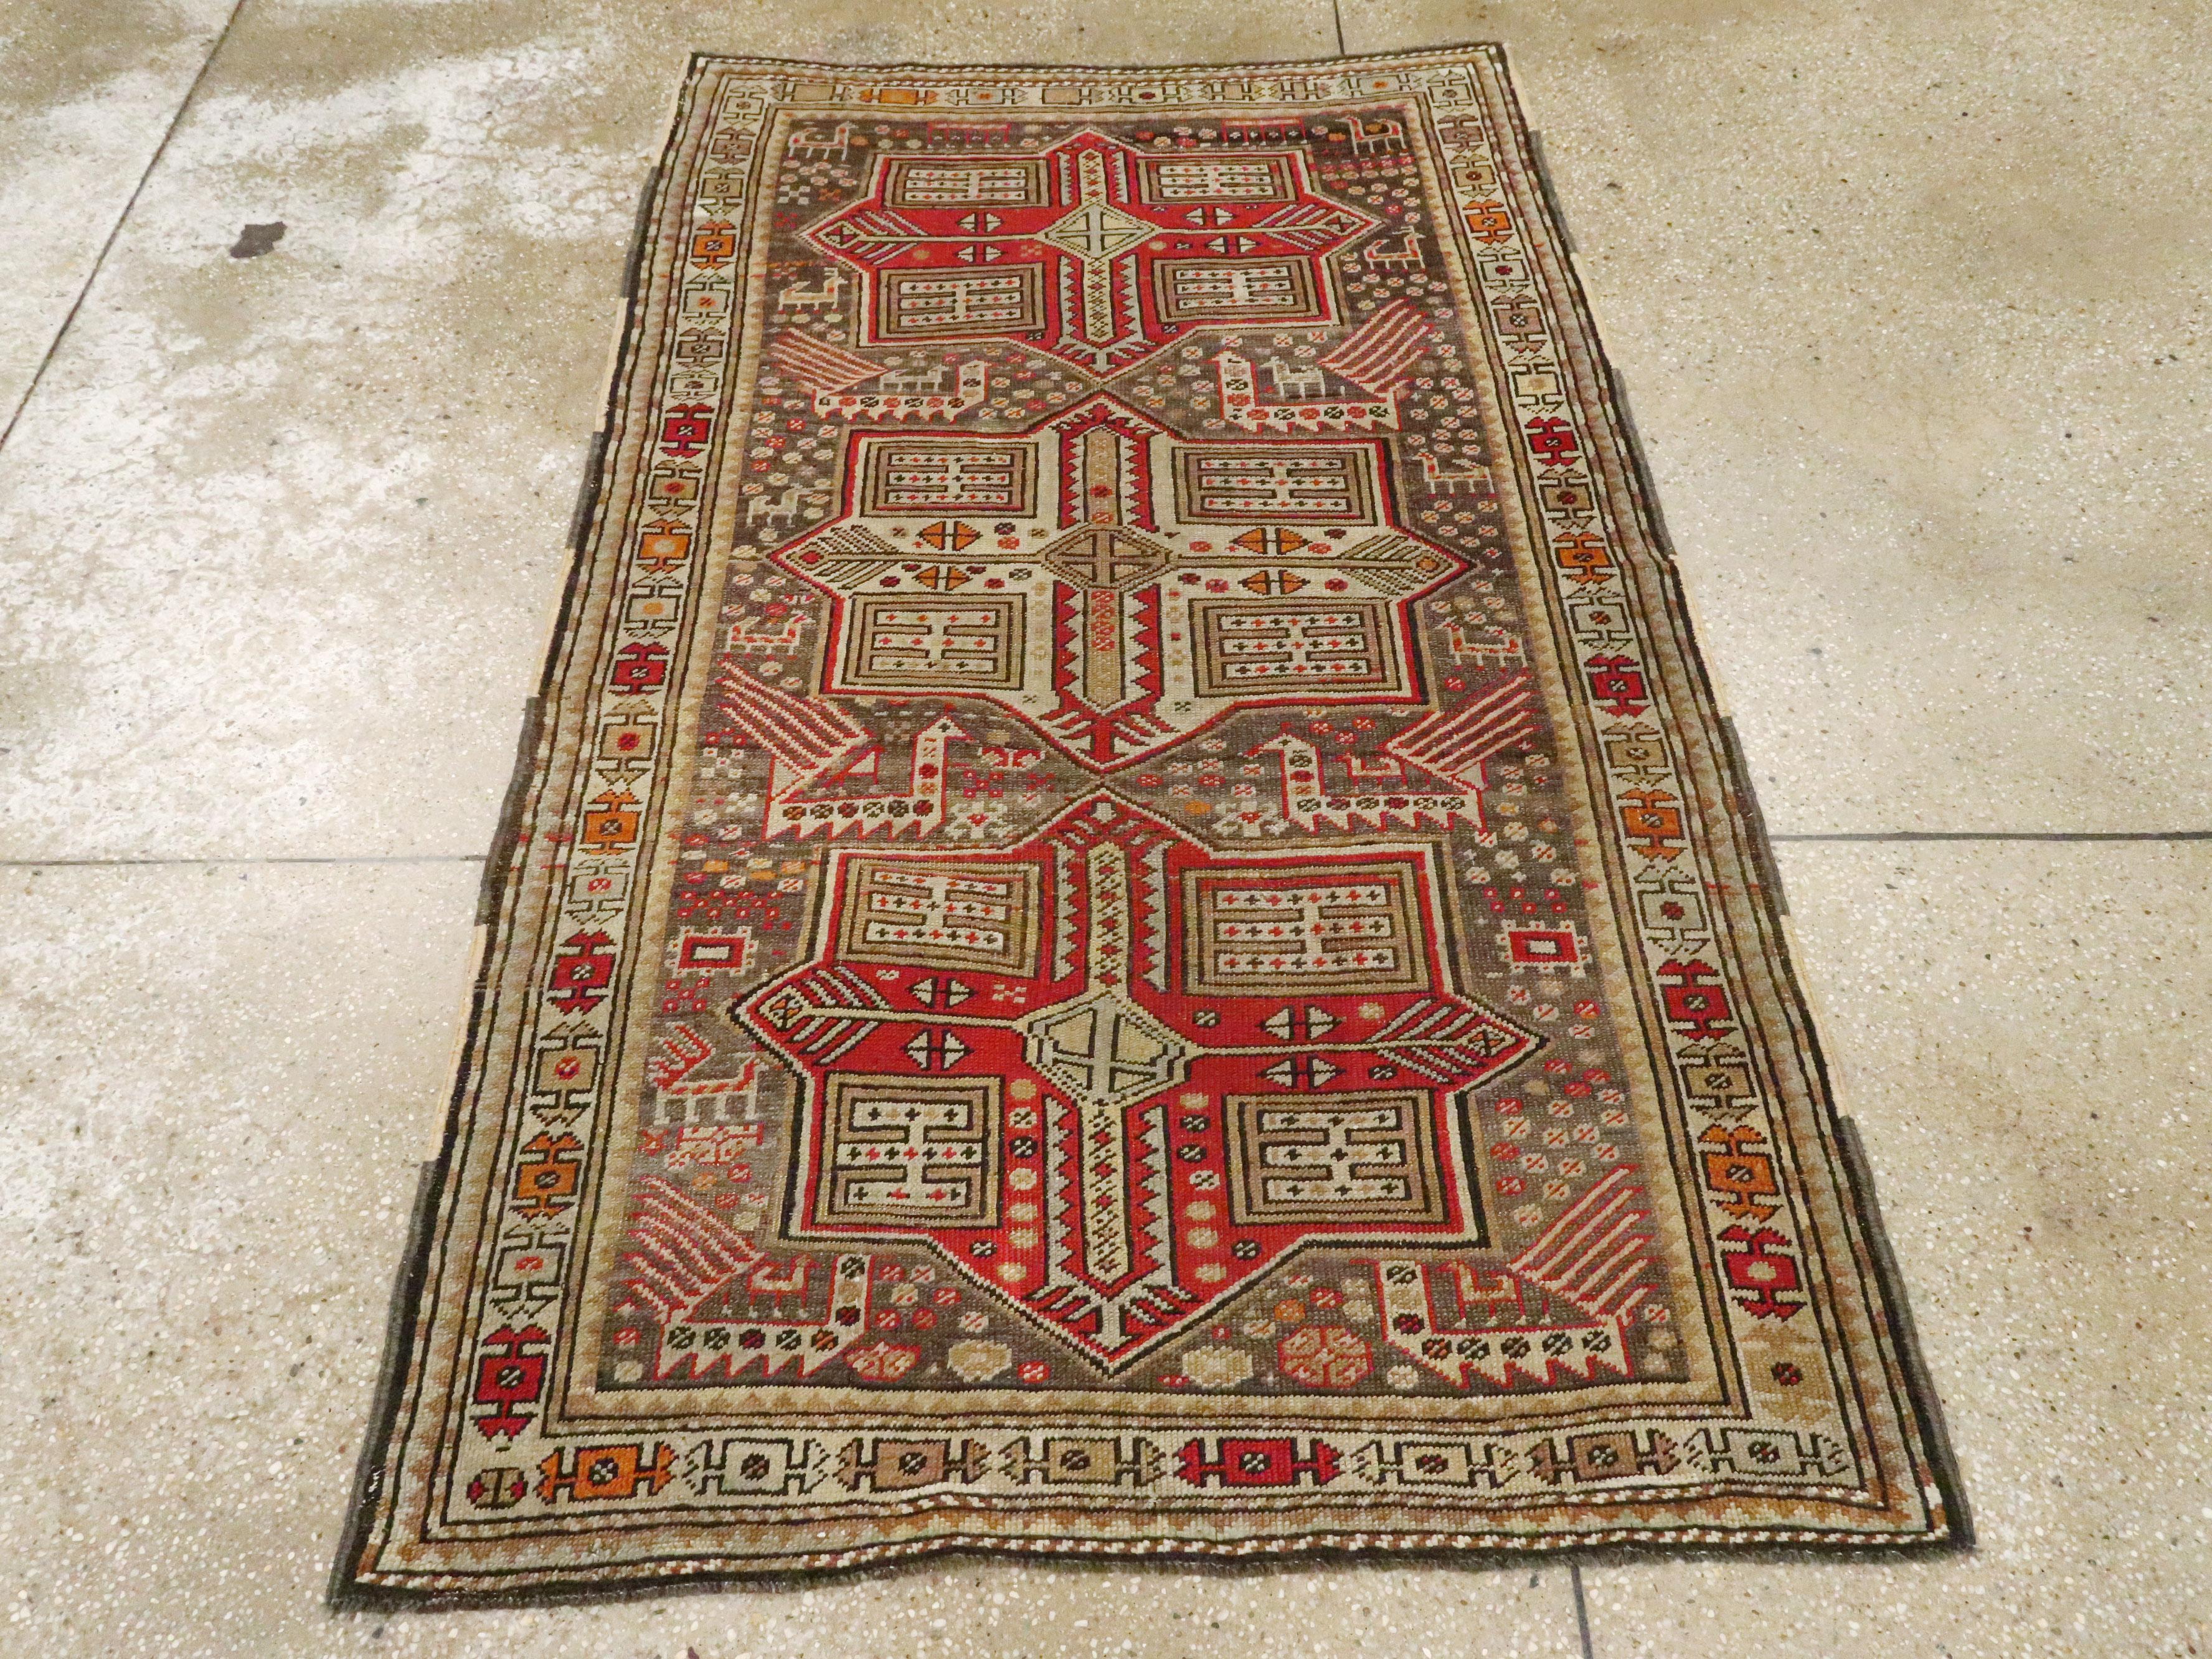 Hand-Knotted Small Handmade Caucasian Tribal Rug In Shades of Grey-Brown and Red